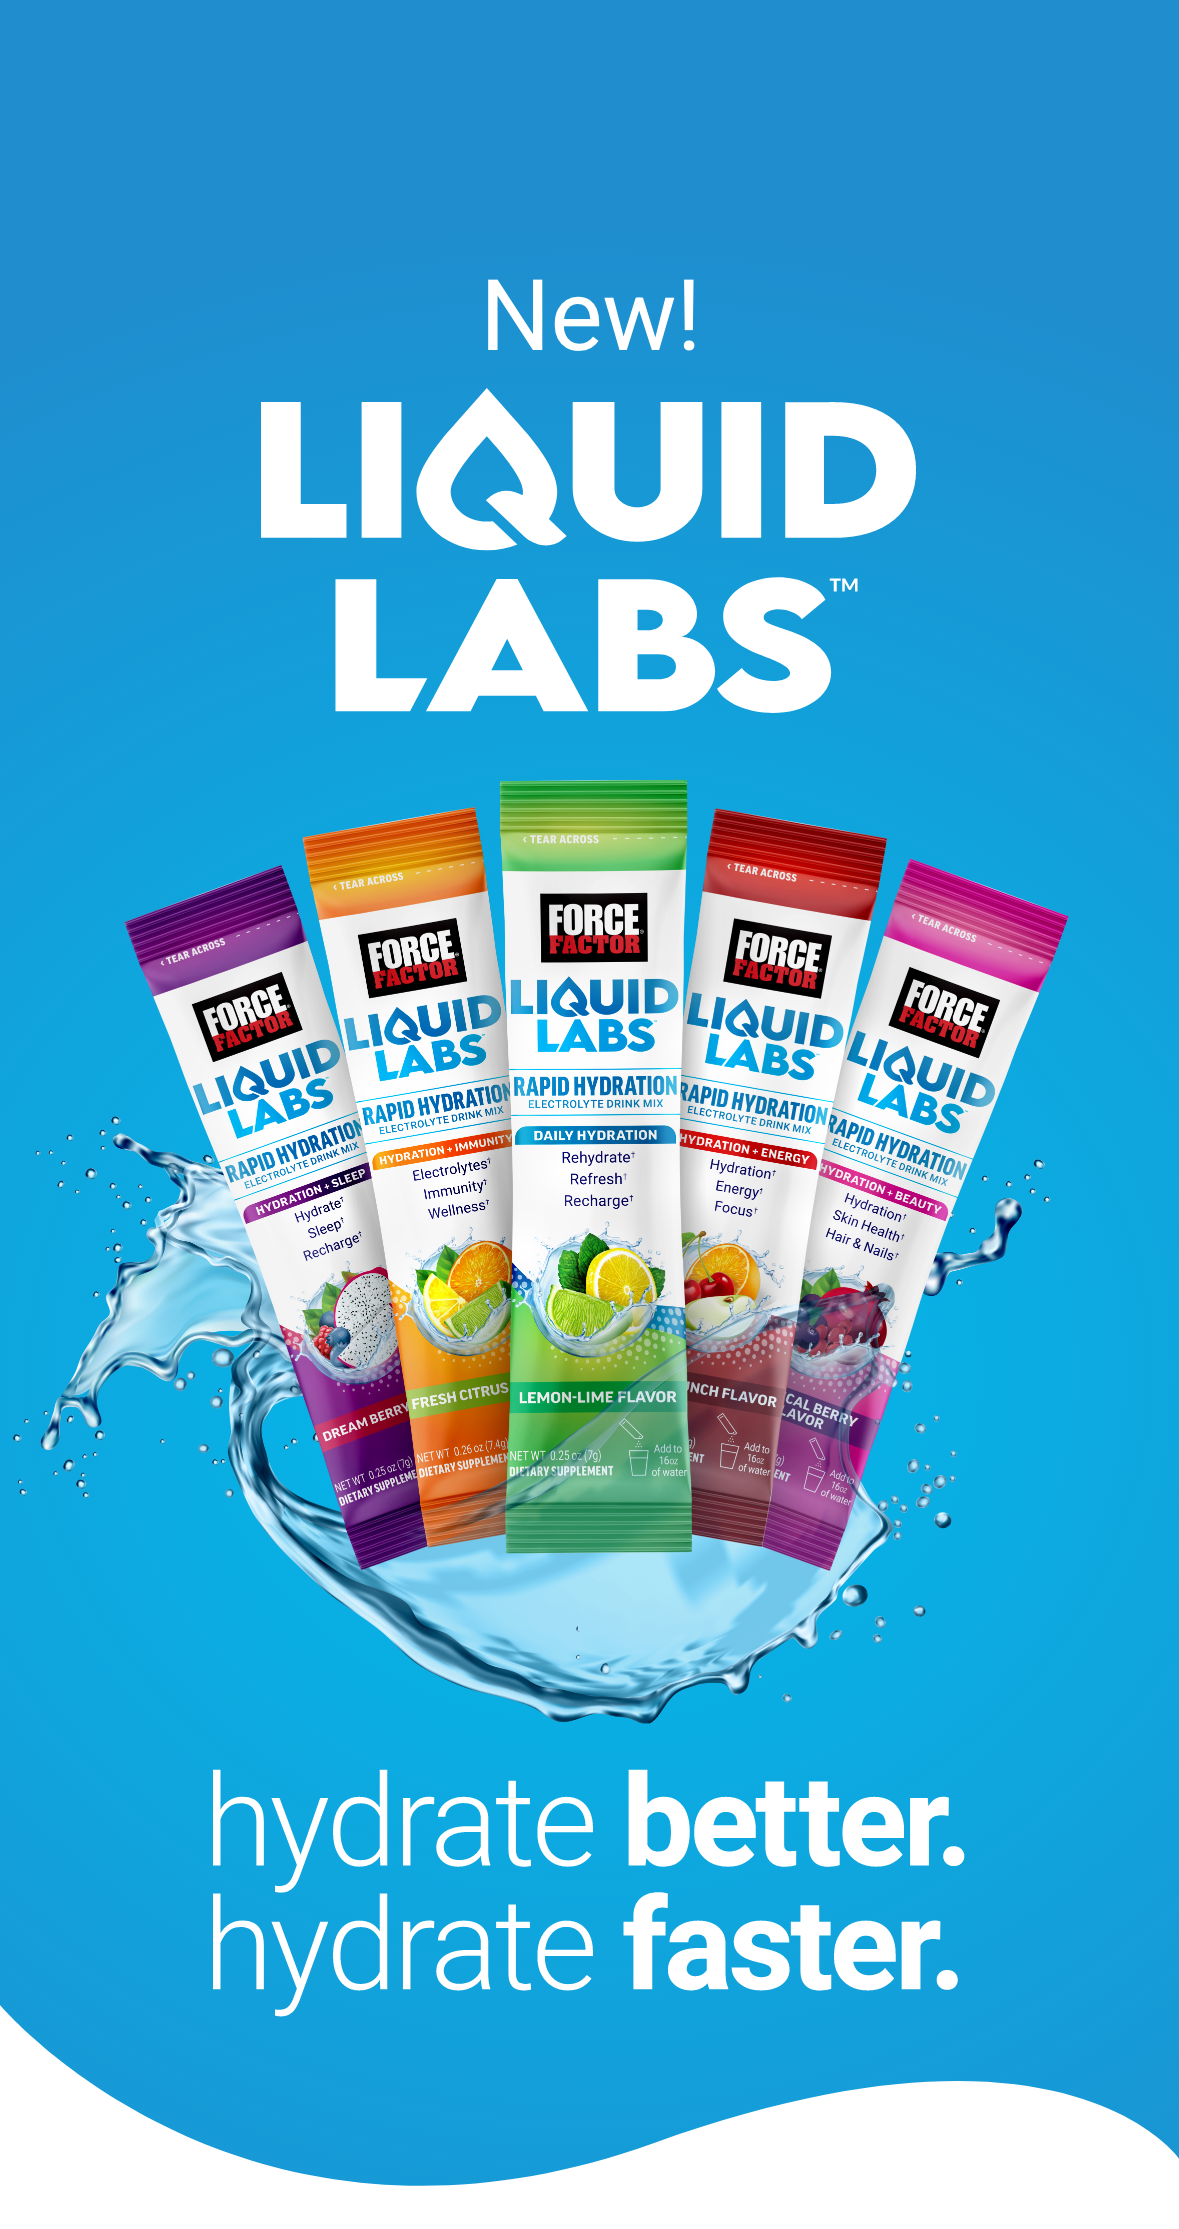 New! Liquid Labs. hydrate better. hydrate faster.